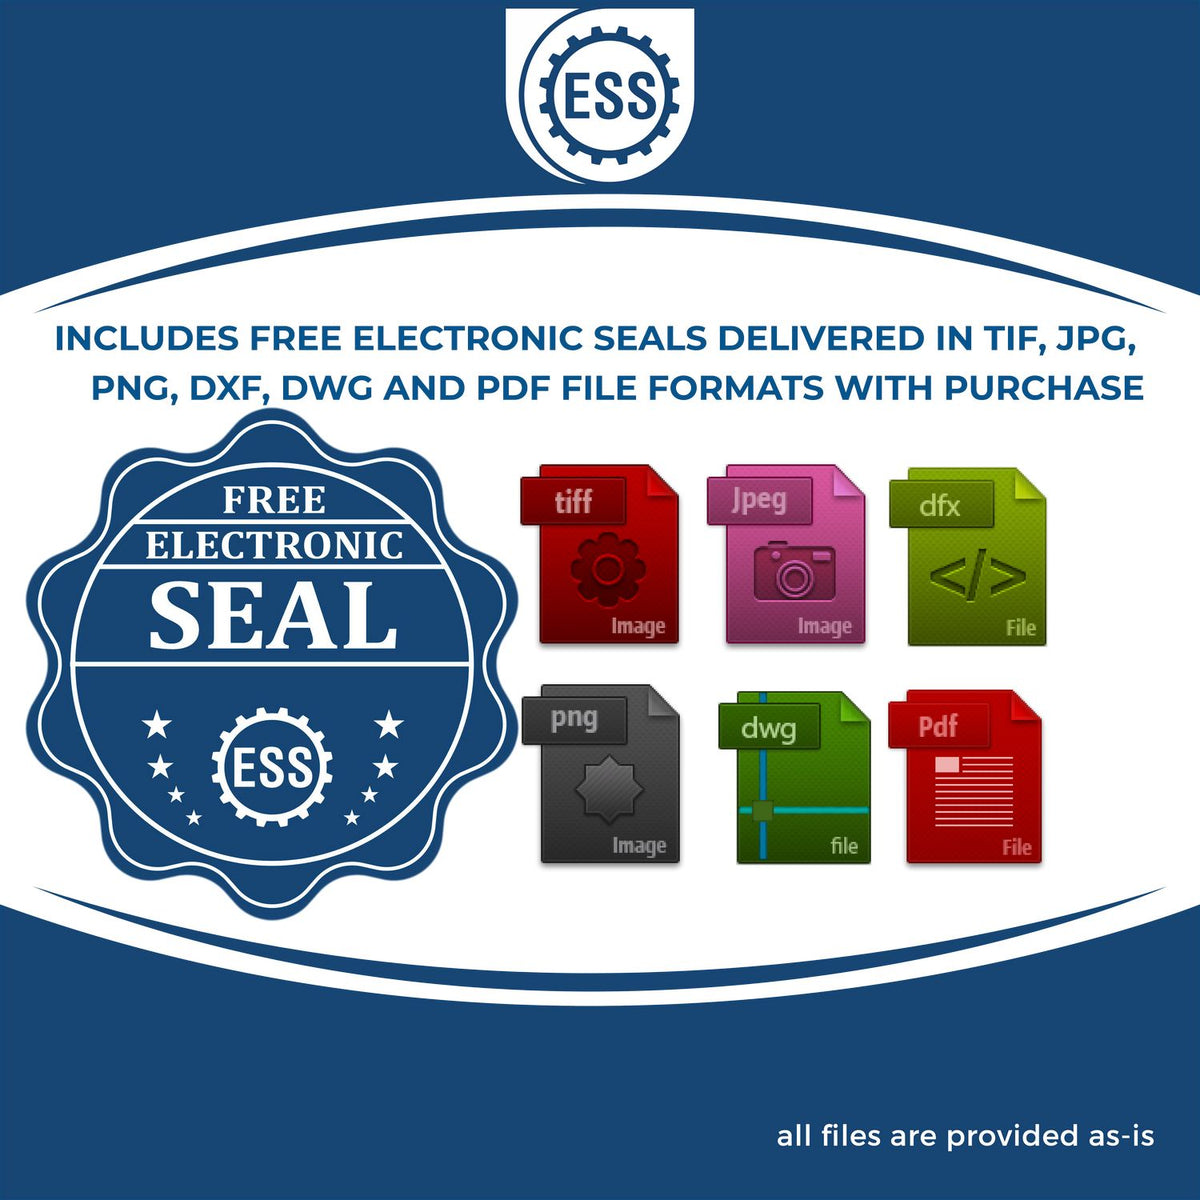 An infographic for the free electronic seal for the Alaska Professional Engineer Seal Stamp illustrating the different file type icons such as DXF, DWG, TIF, JPG and PNG.